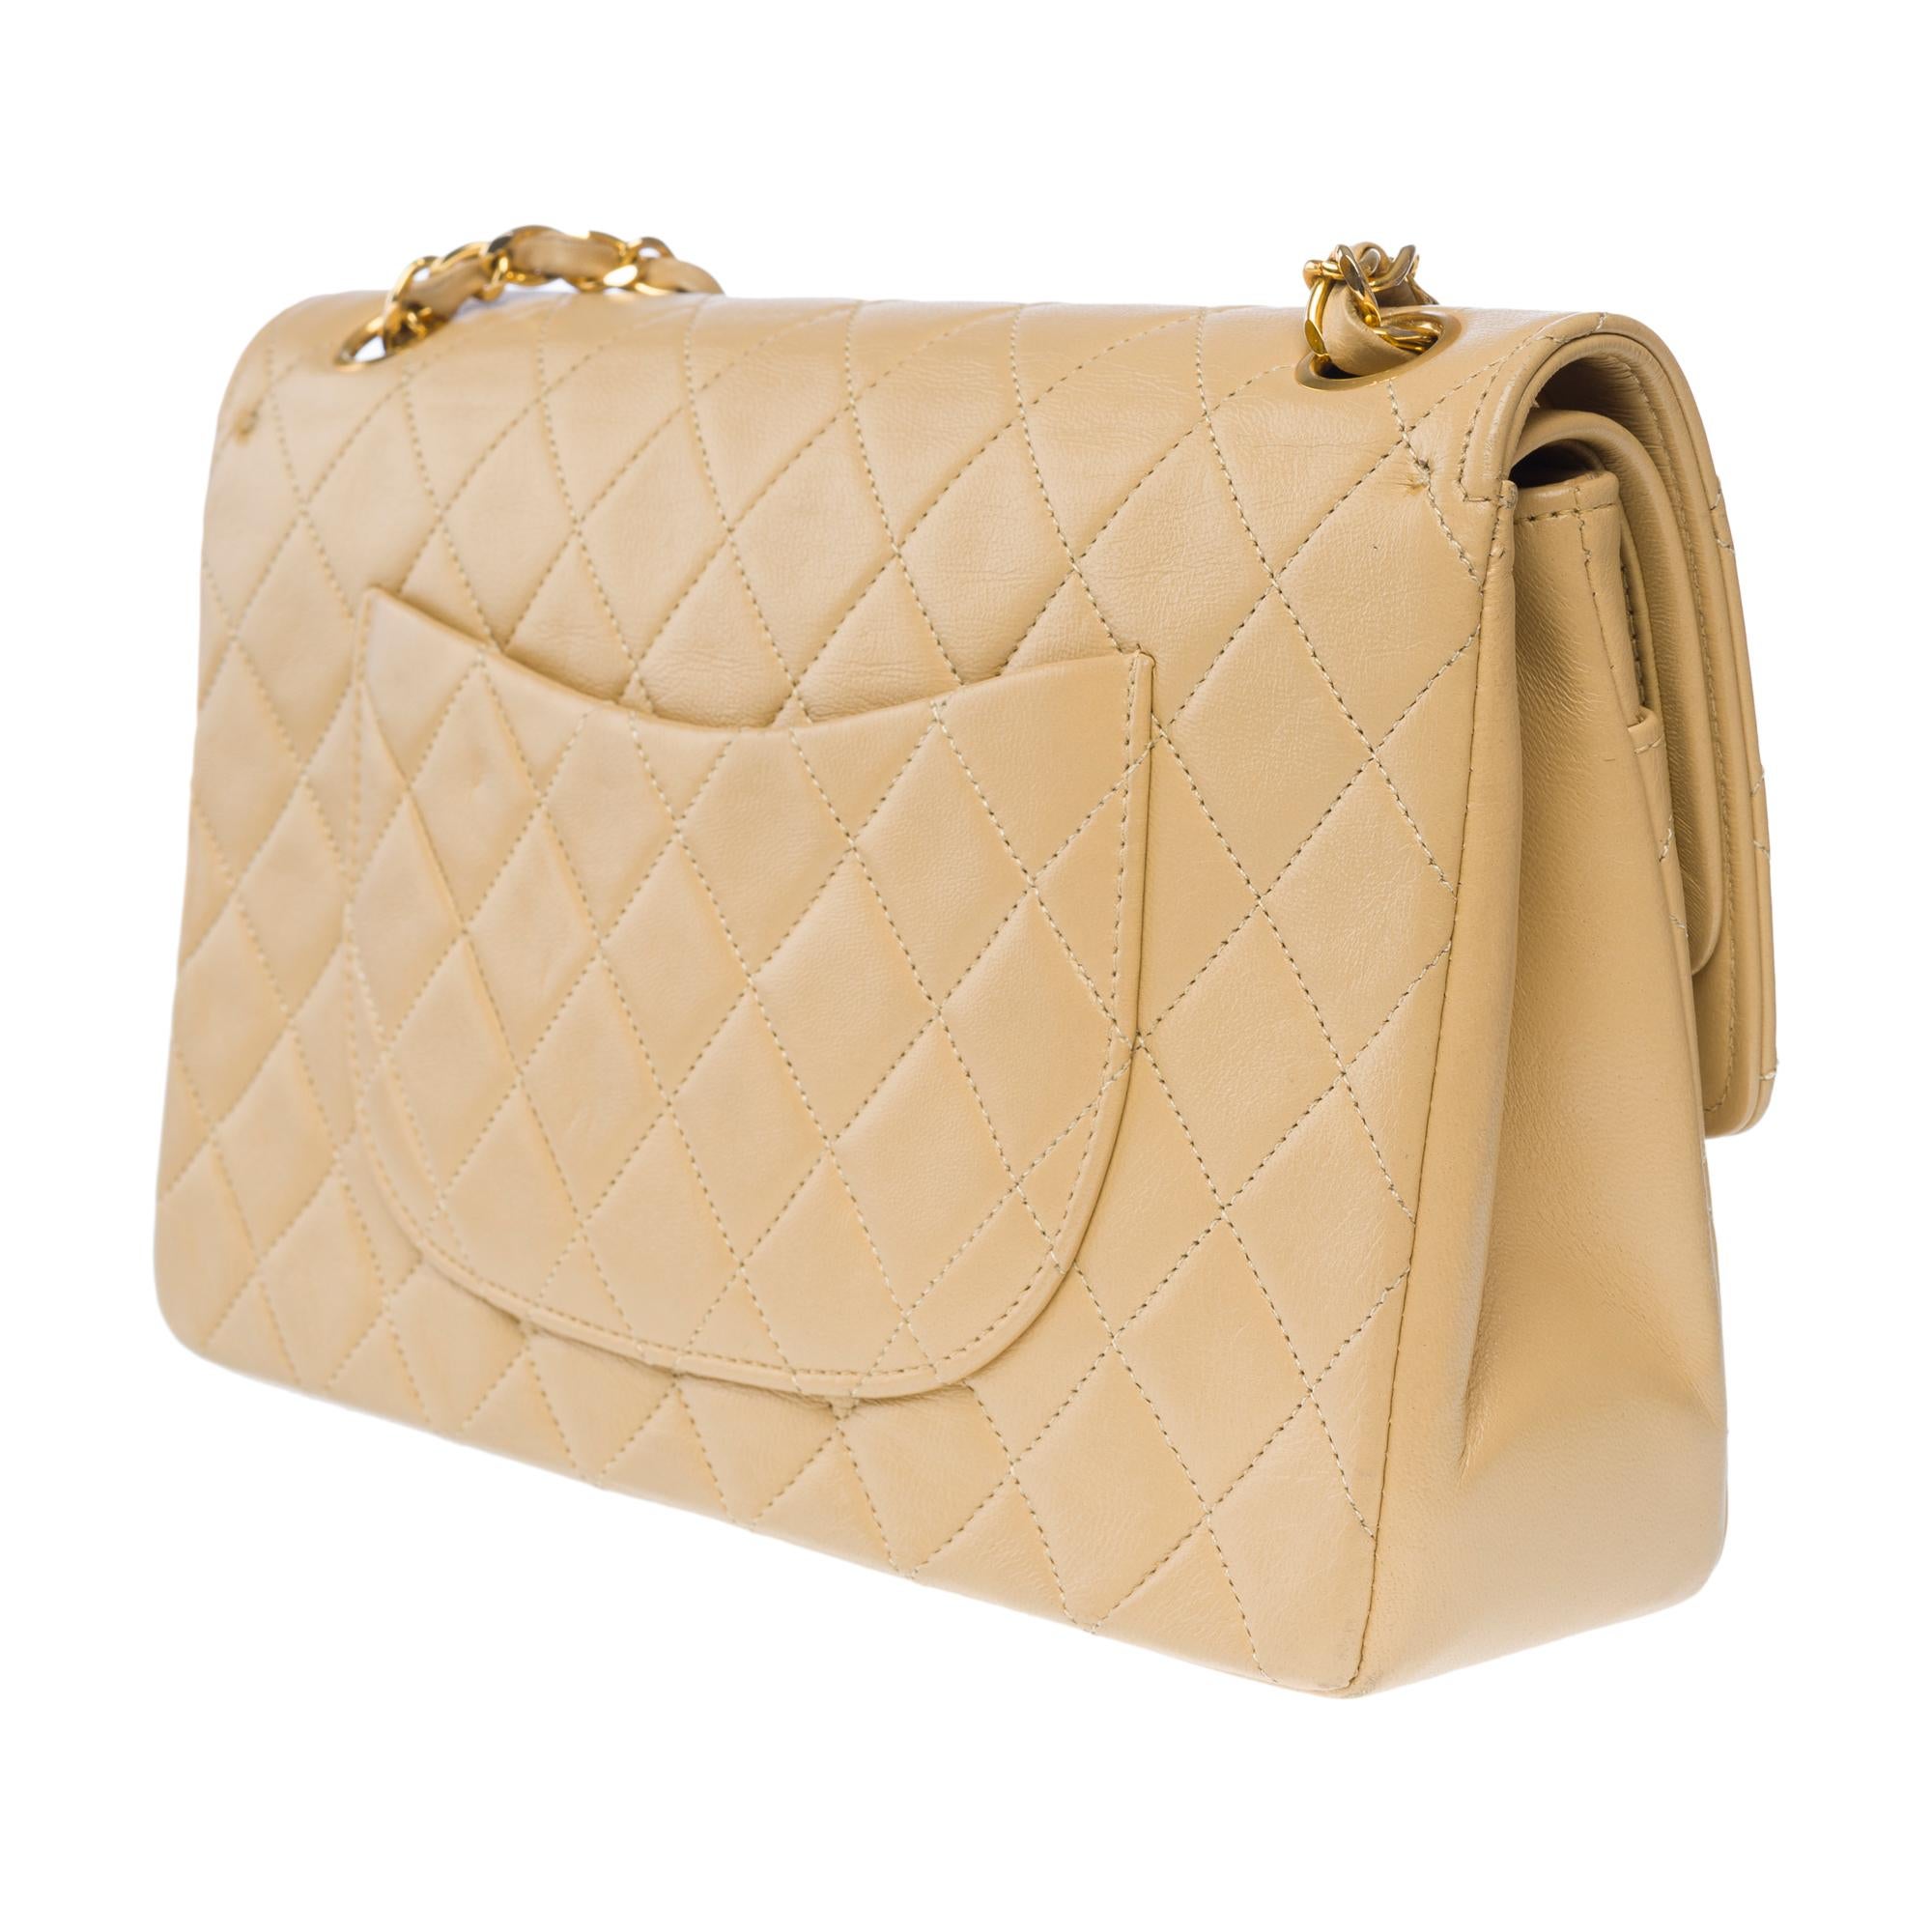 Chanel Timeless double flap shoulder bag in beige quilted lambskin leather, GHW 1